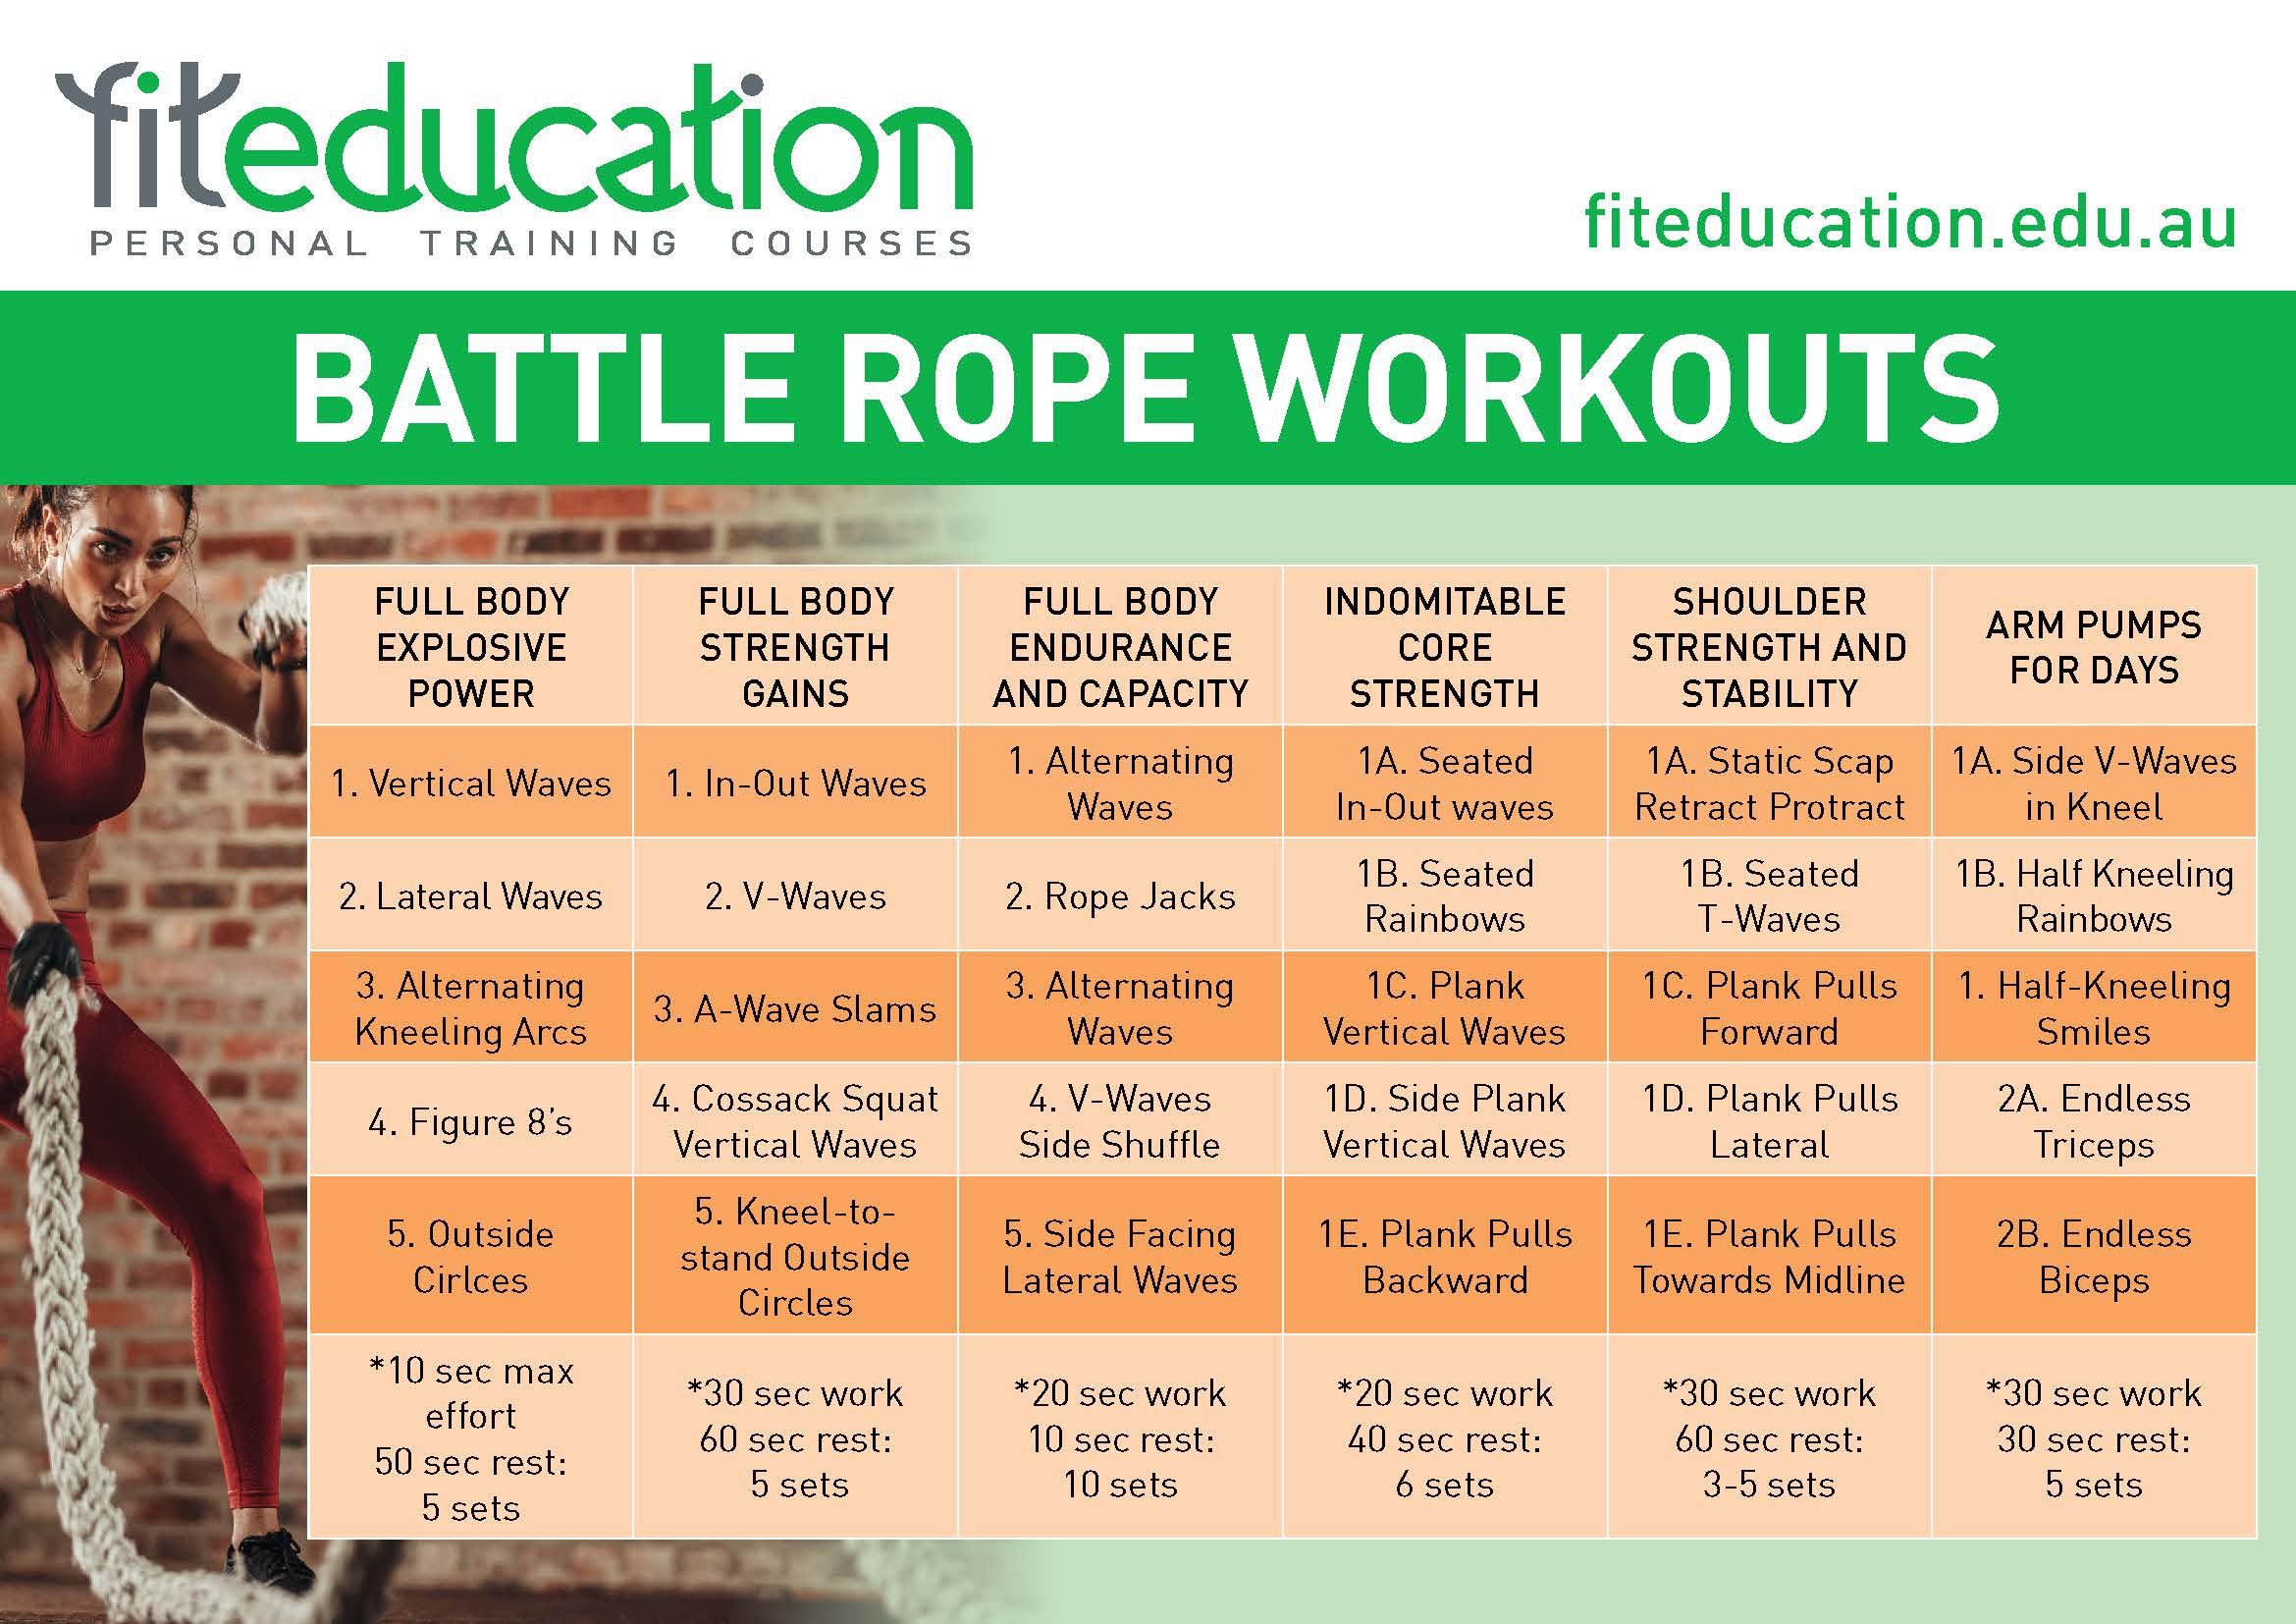 Battle Rope Squatting Alternating Waves – WorkoutLabs Exercise Guide